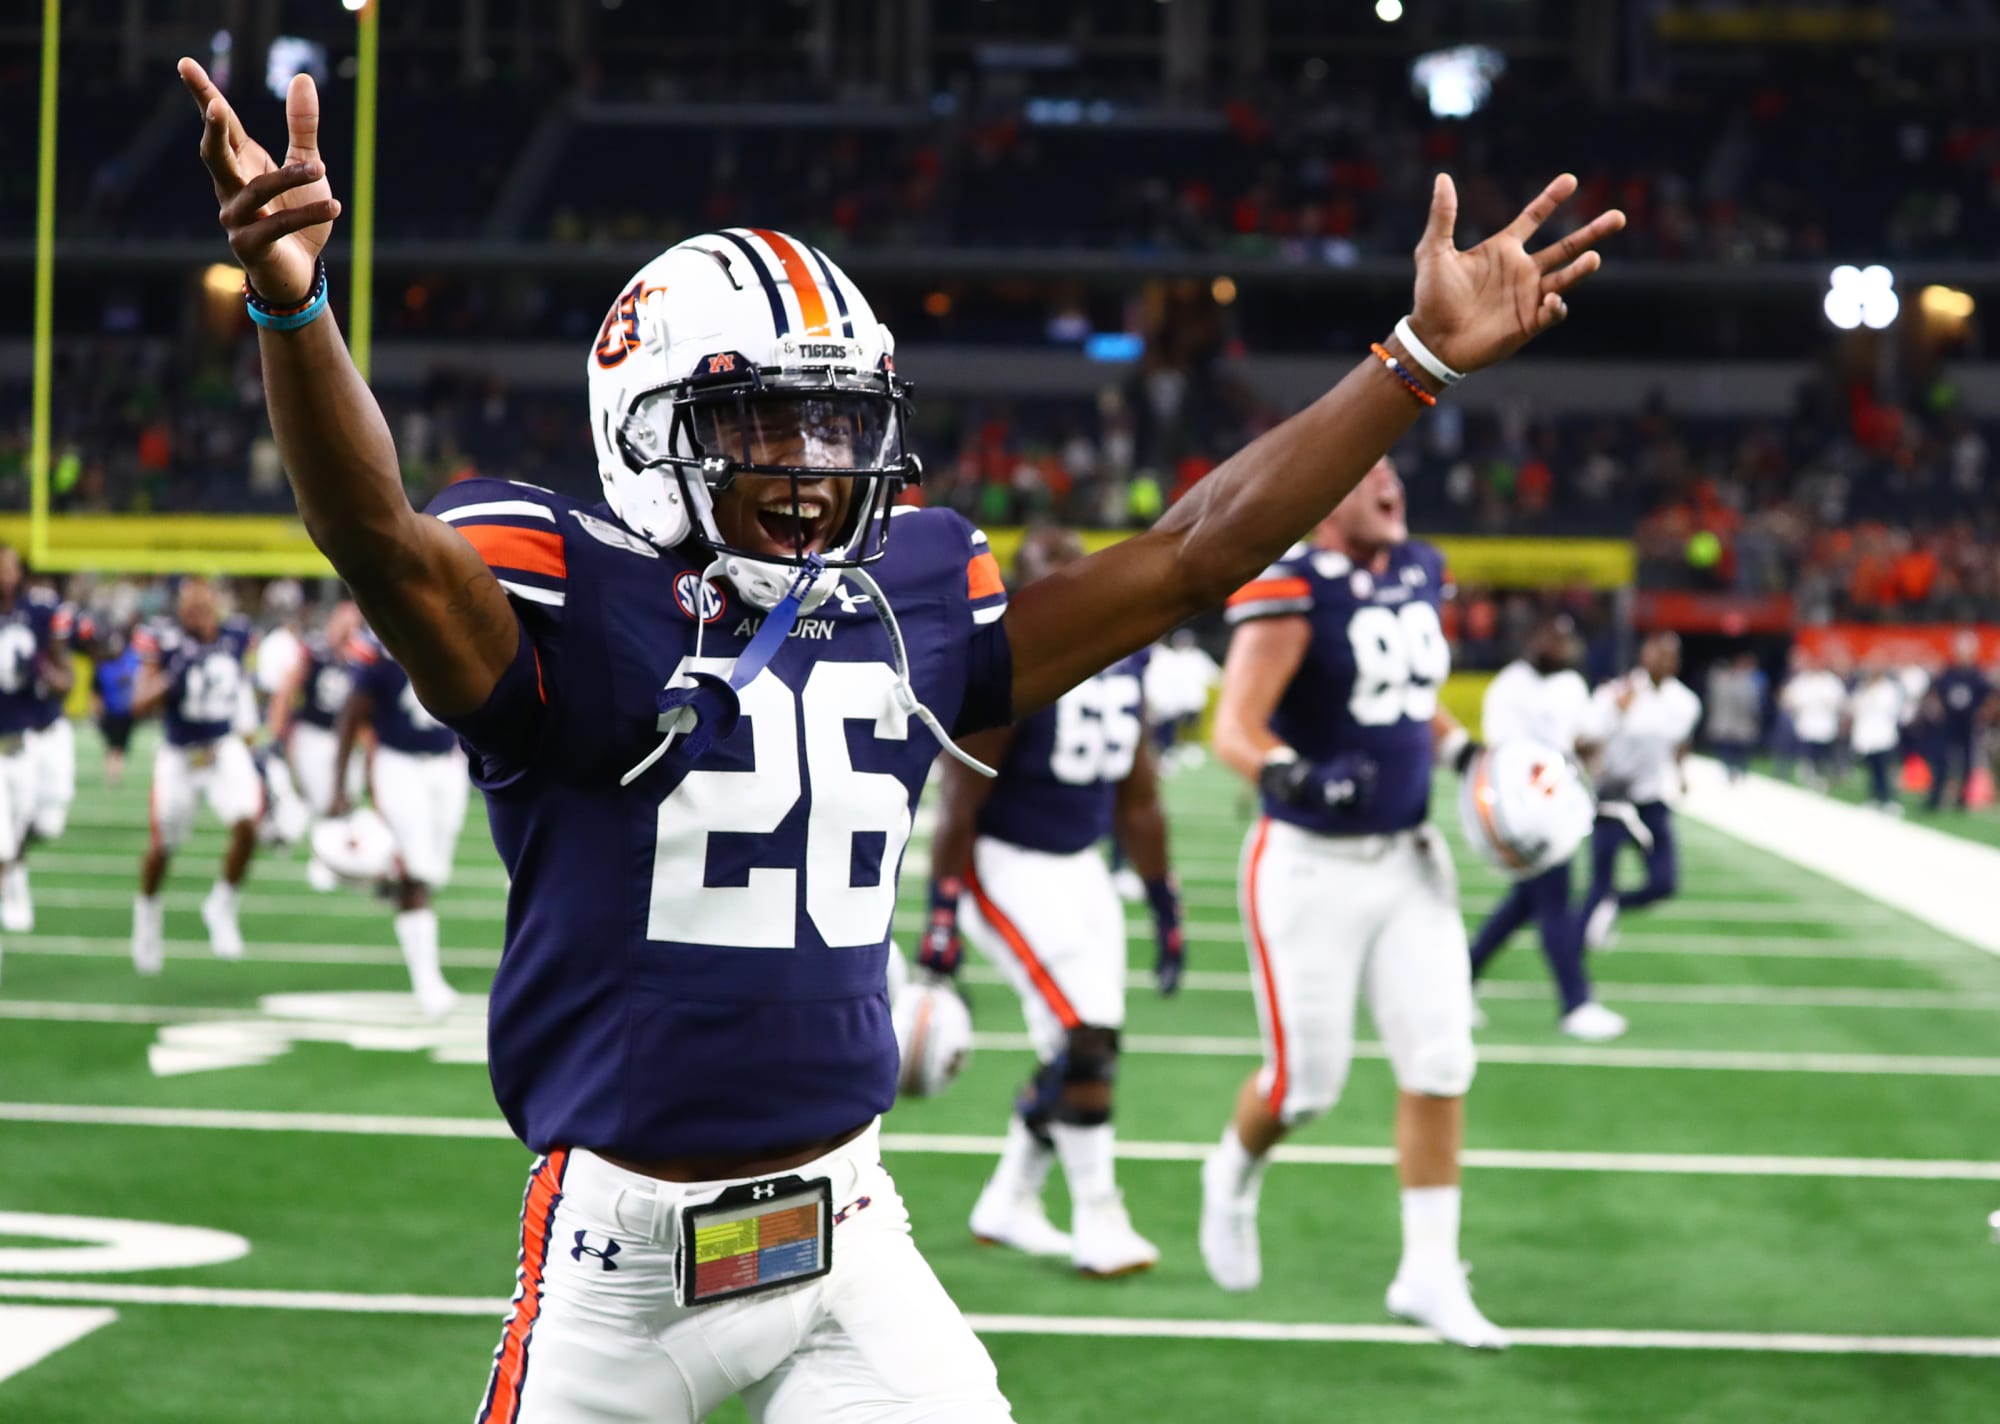 2022 Auburn football commit sets official visits with Florida, UCF